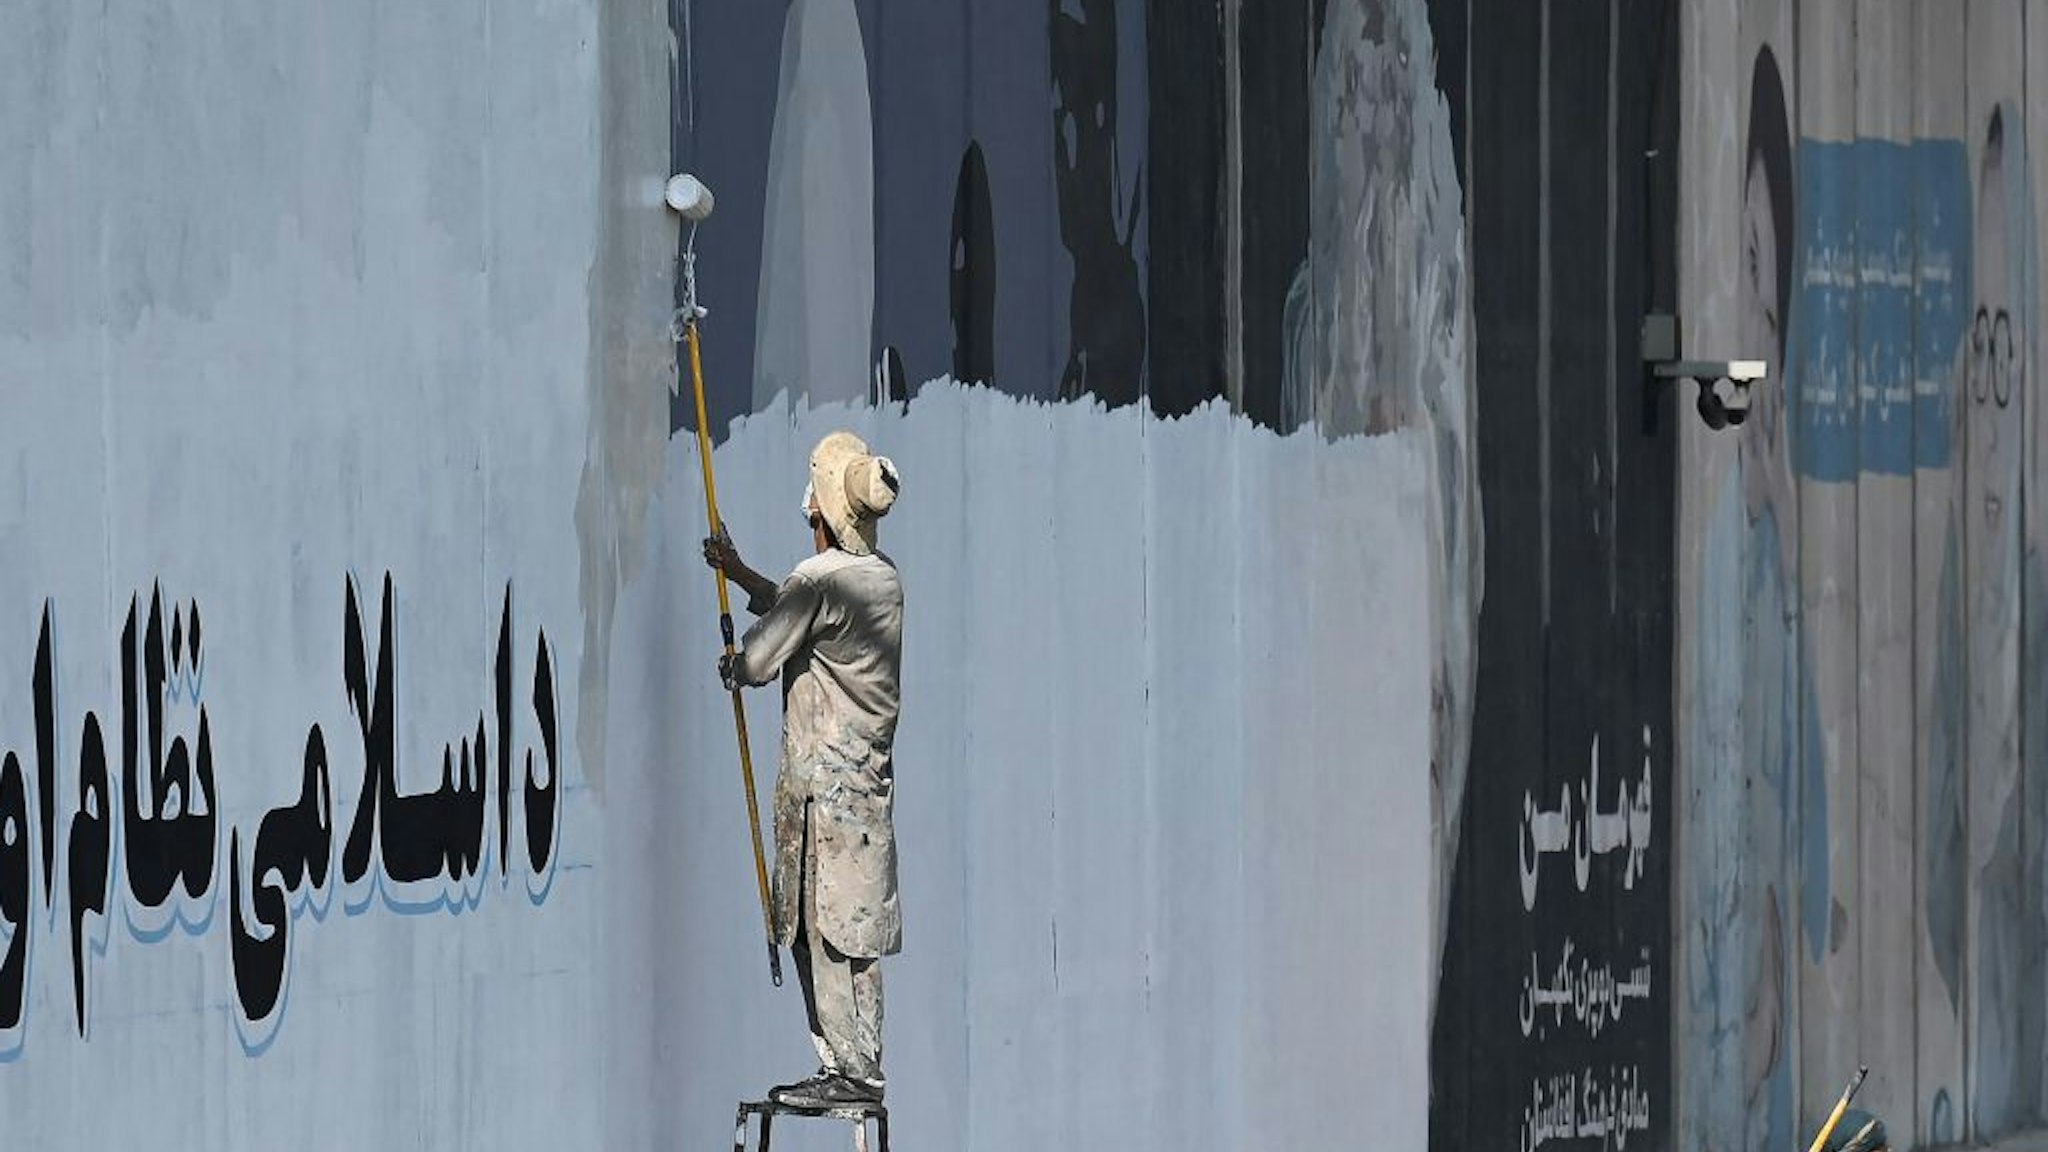 TOPSHOT - A man paints over murals on a concrete wall along a street in Kabul on September 4, 2021. - Within weeks of the Taliban taking the capital, many of the street art pieces have been painted over, replaced by drab propaganda slogans as the Islamist reimpose their austere vision on Afghanistan. (Photo by Aamir QURESHI / AFP) (Photo by AAMIR QURESHI/AFP via Getty Images)